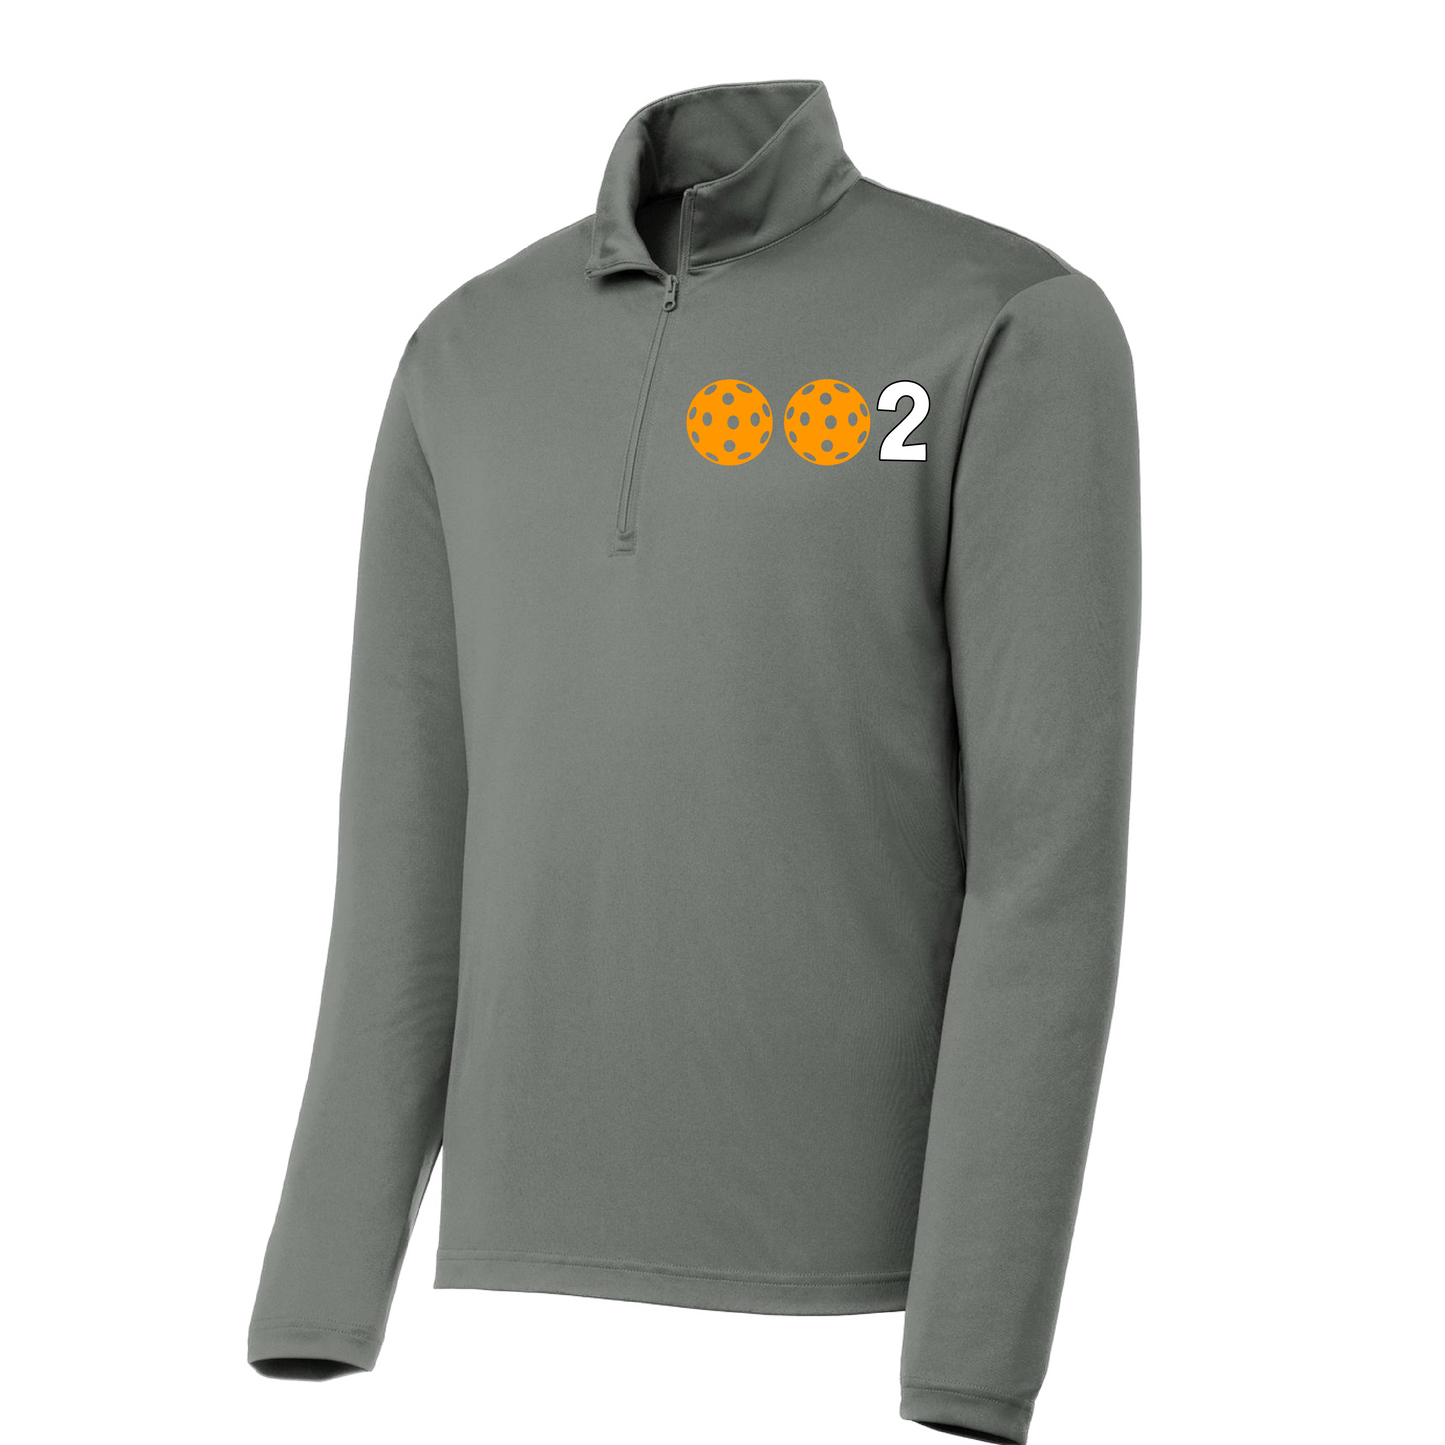 002 Pickleball (Colors Green Orange Red Or Stars) | Men's 1/4 Zip Long Sleeve Pullover Athletic Shirt | 100% Polyester